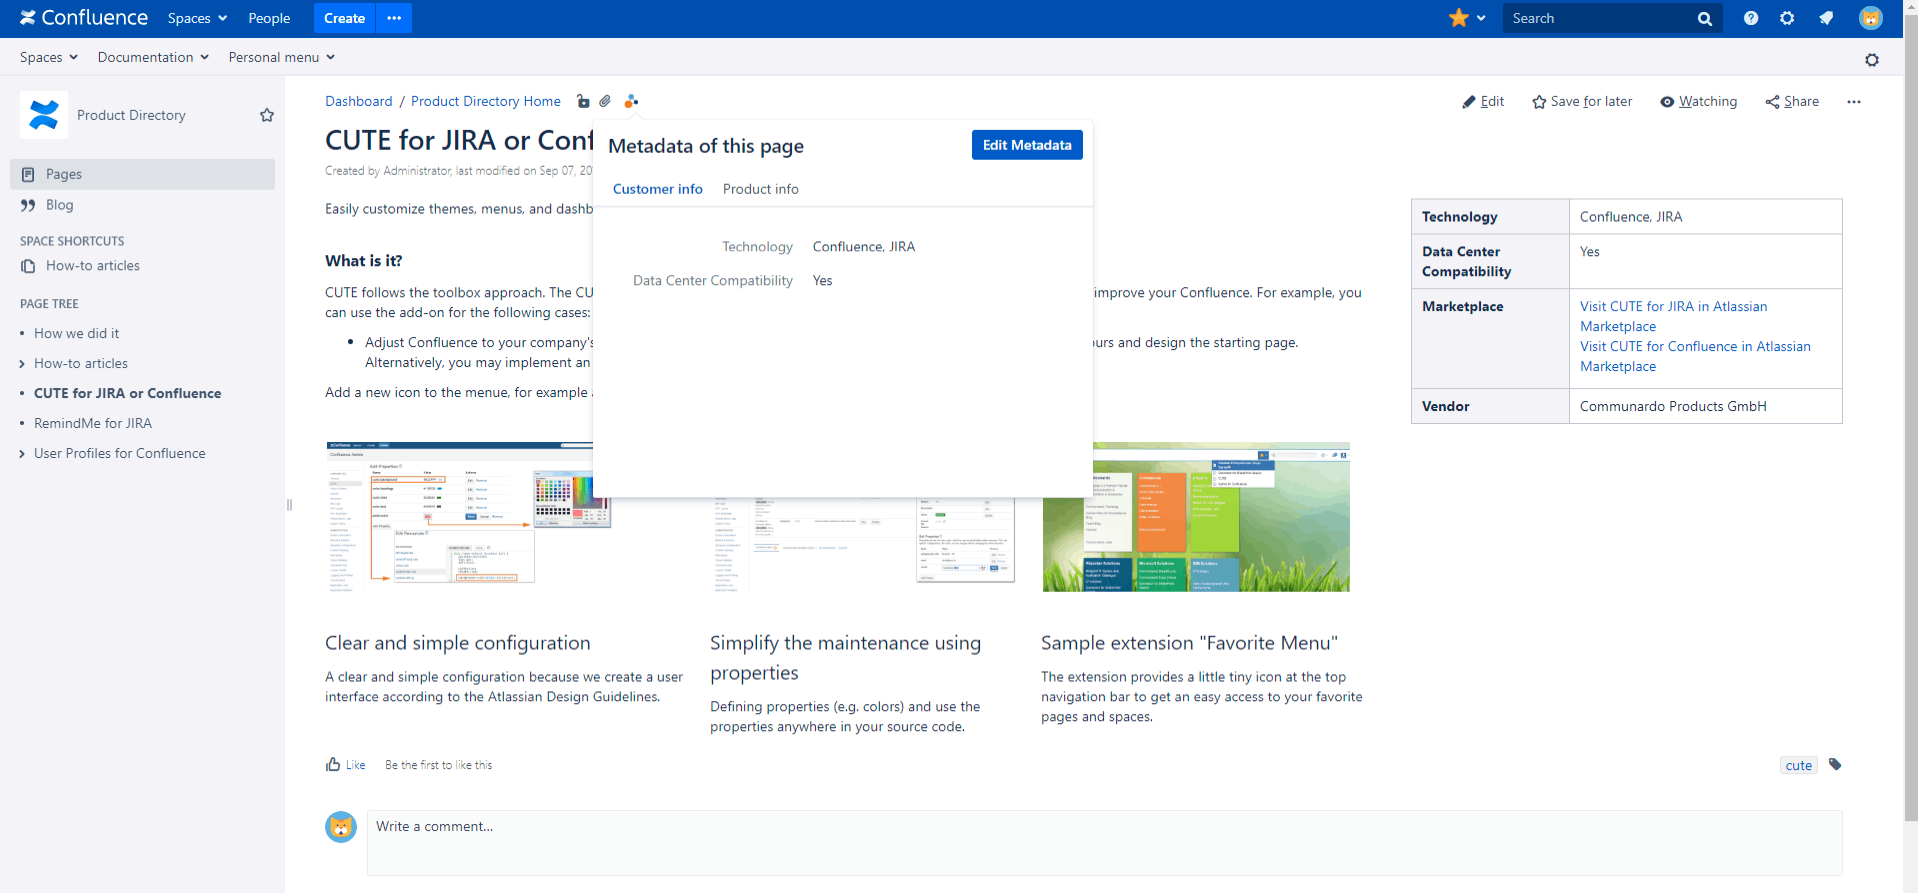 jira apps metadata for confluence 